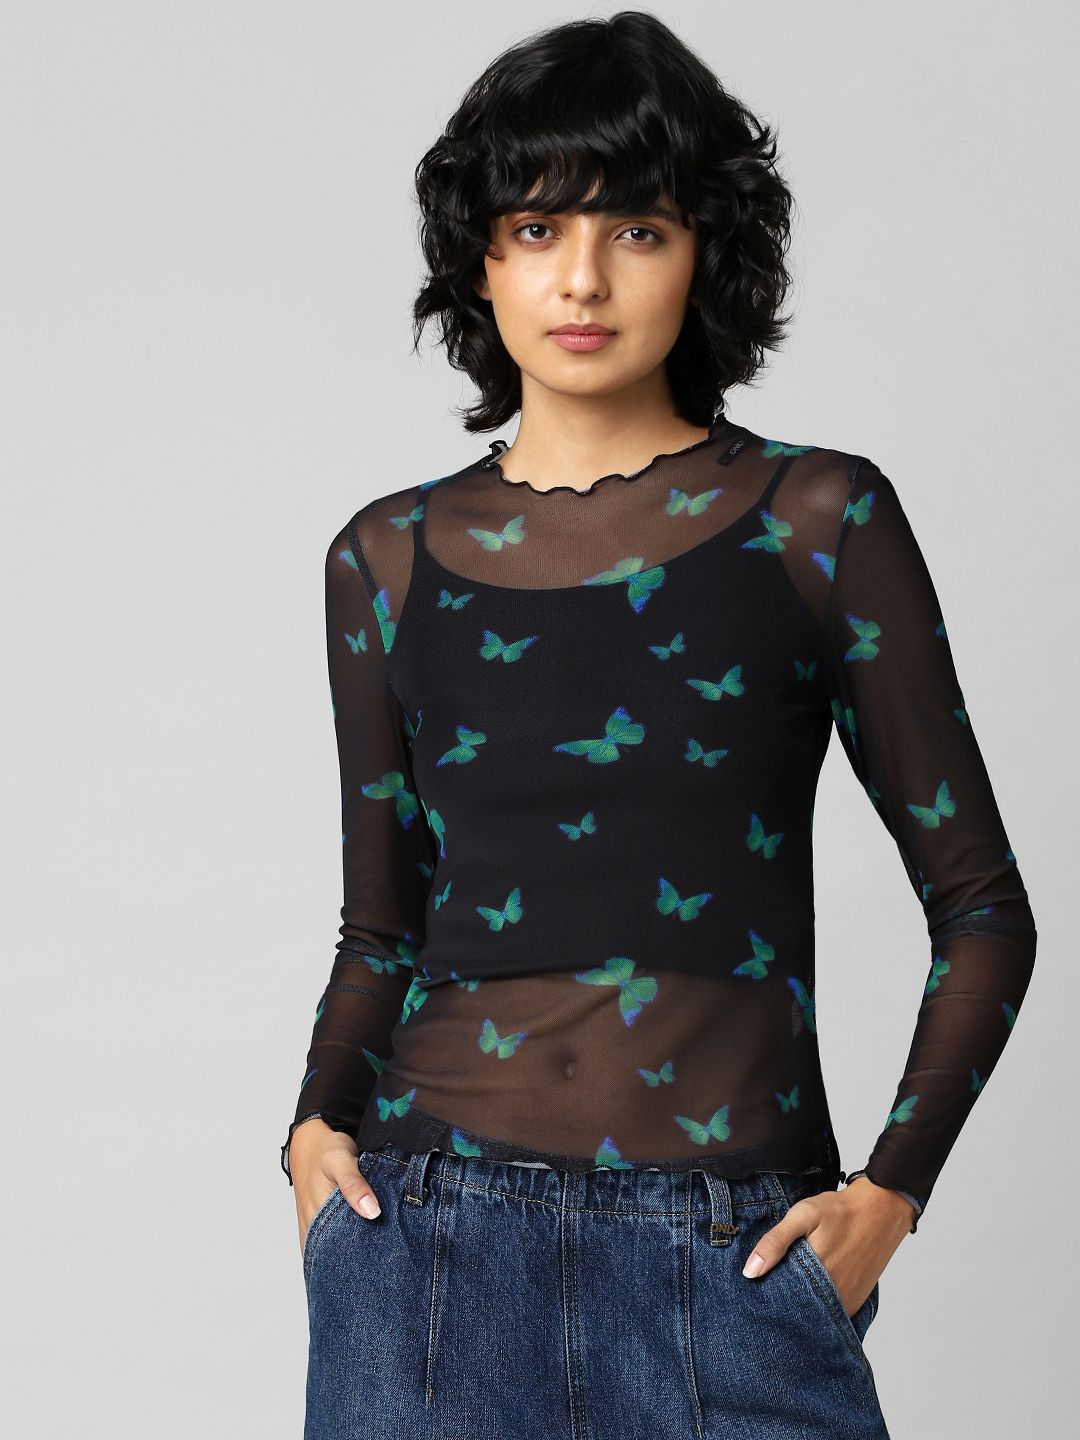 ONLY Women Printed Sheer Top Price in India